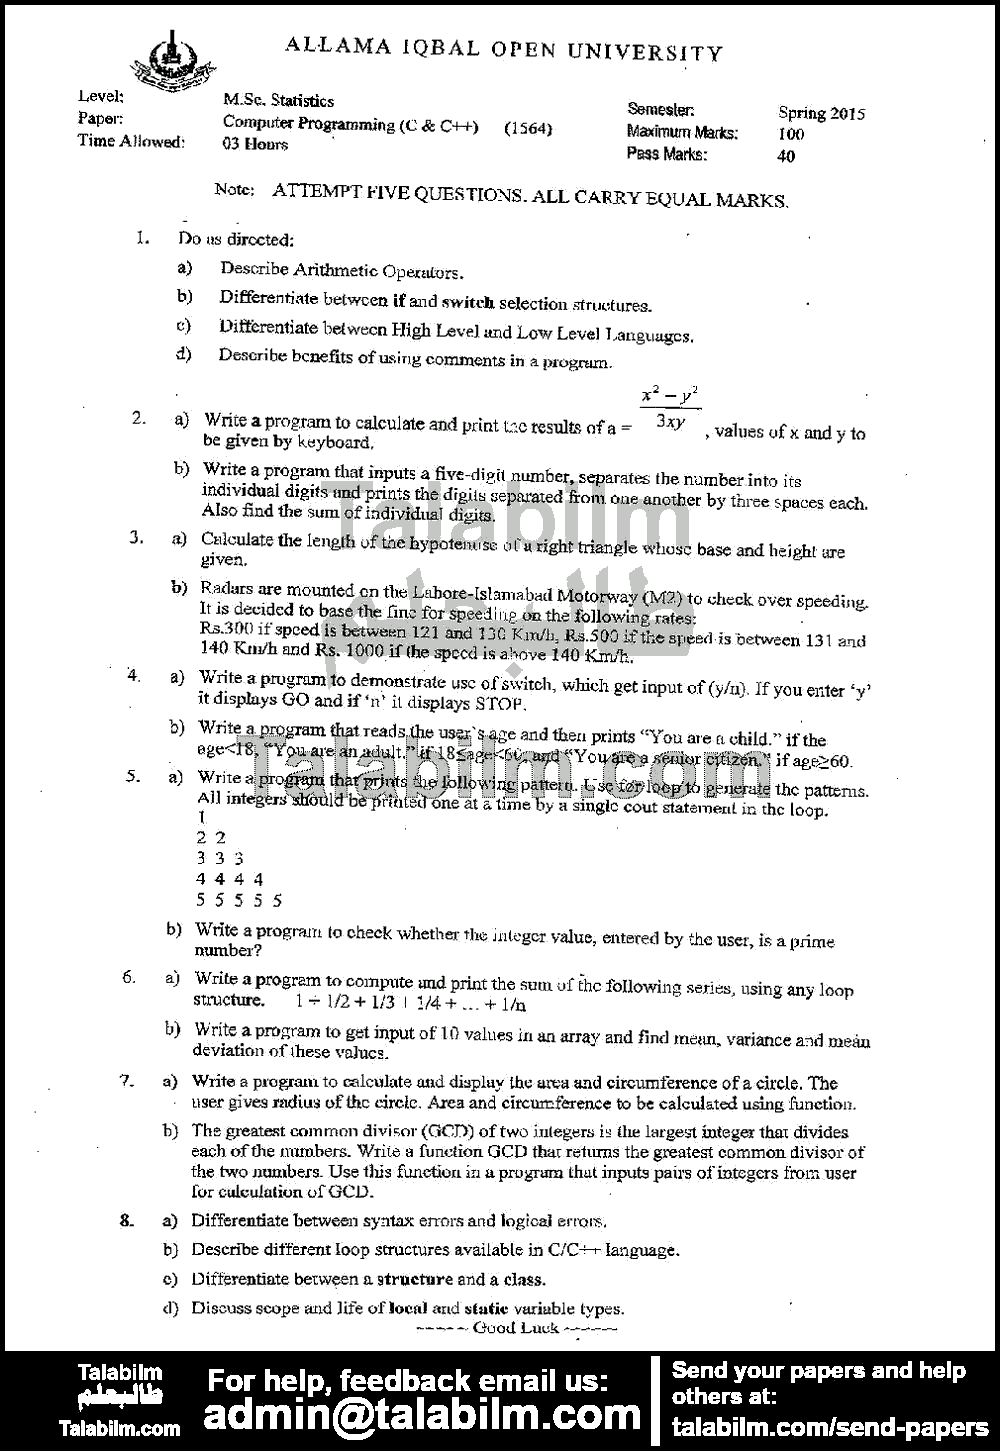 Computer Programming (C & C++) 1564 past paper for Spring 2015